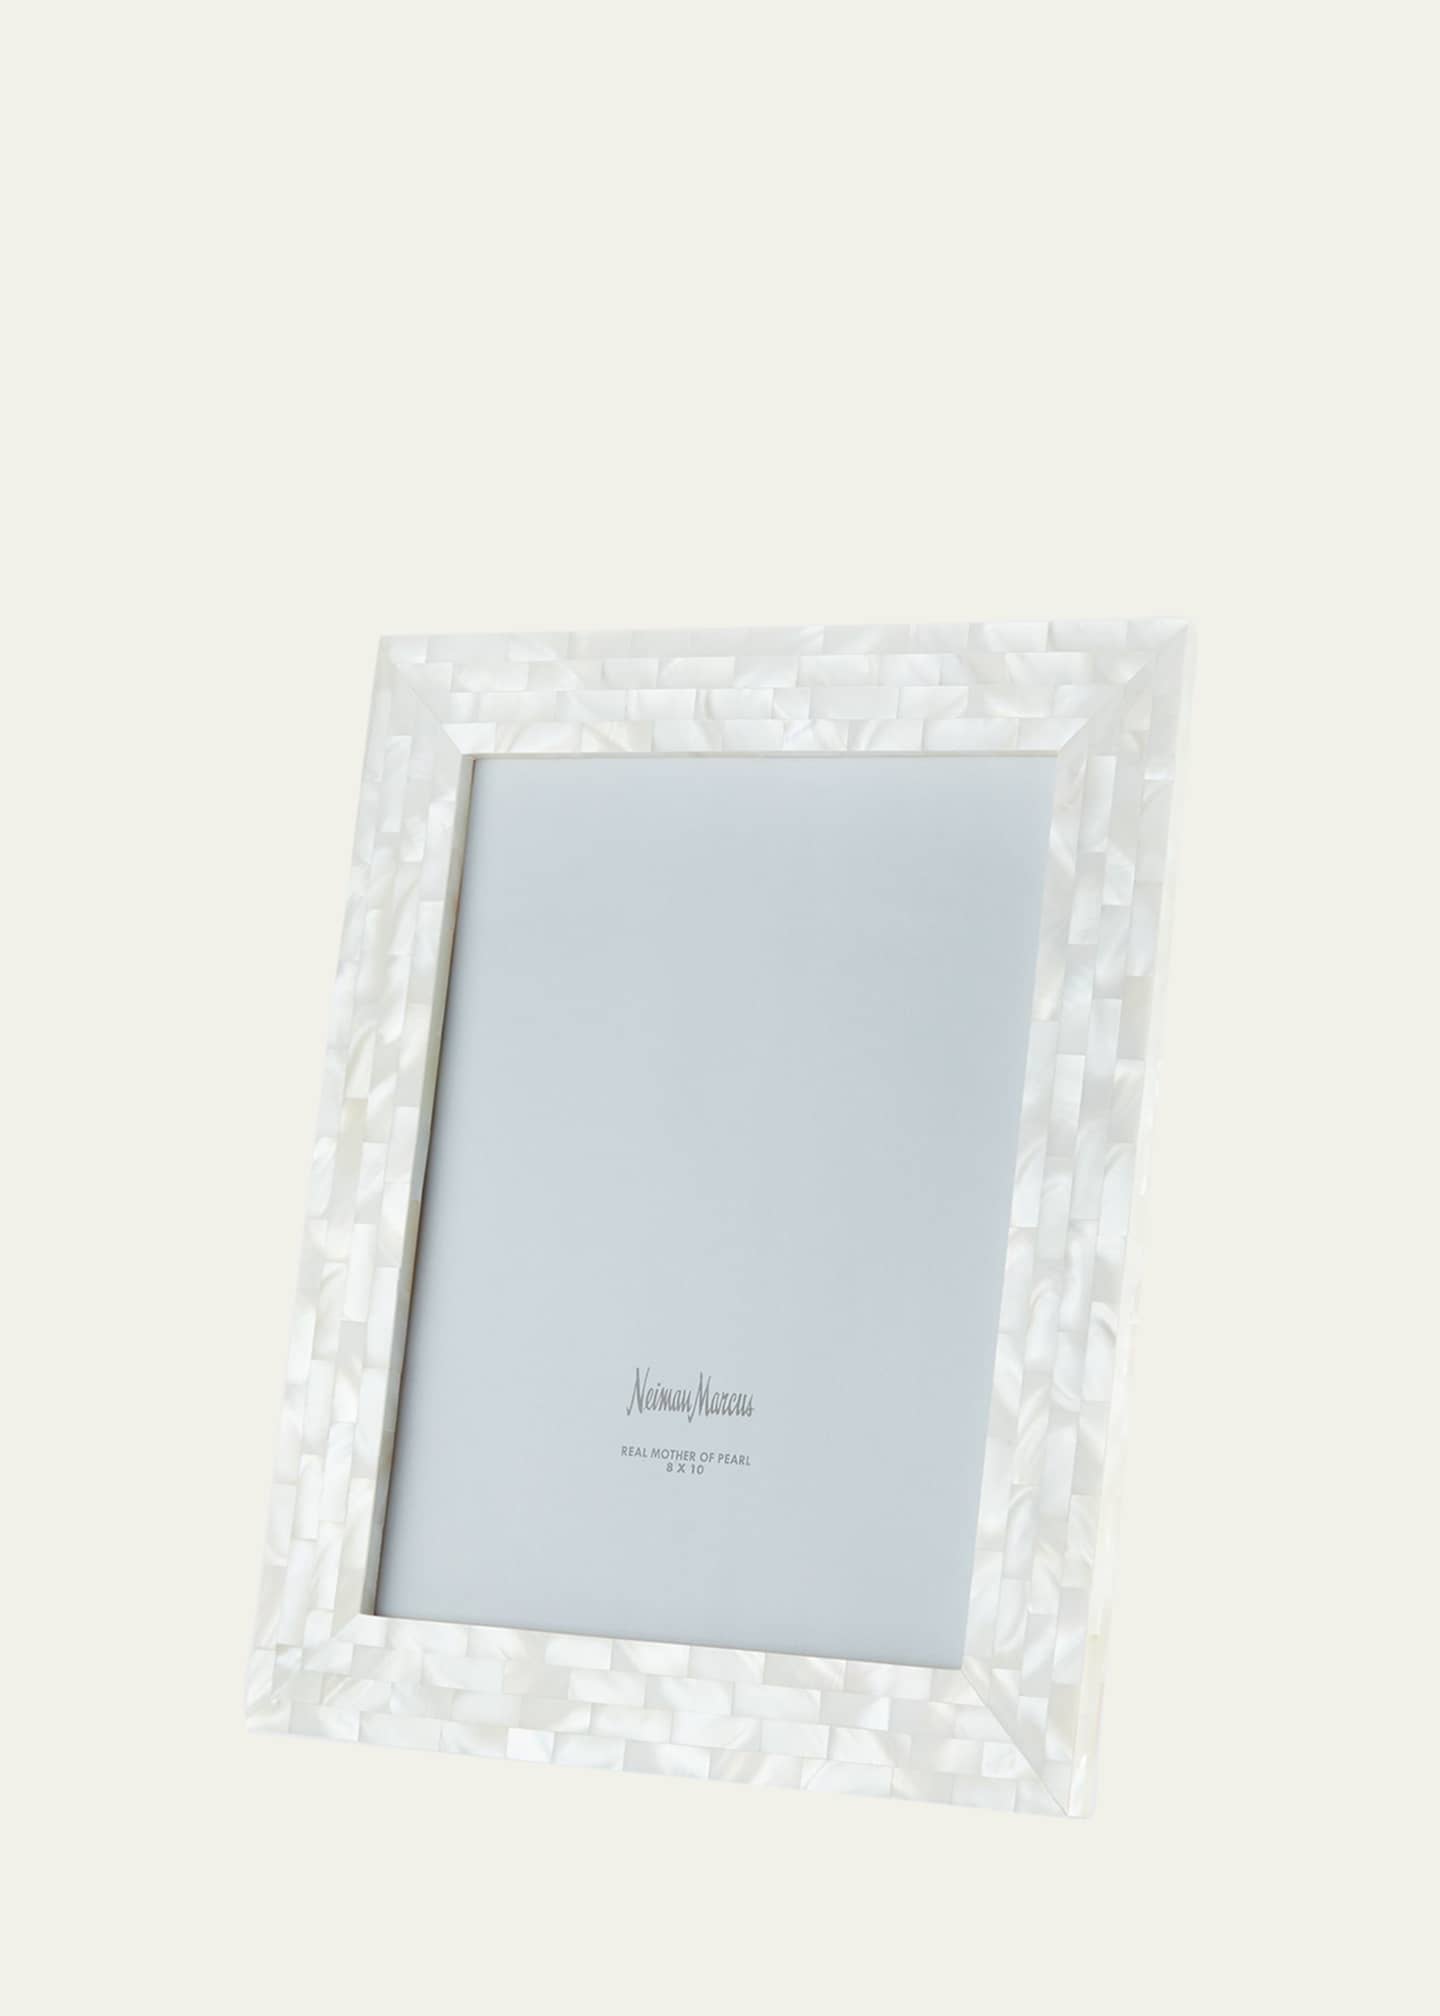 The Jws Collections Mother-of-Pearl Picture Frame, White, 8" x 10"